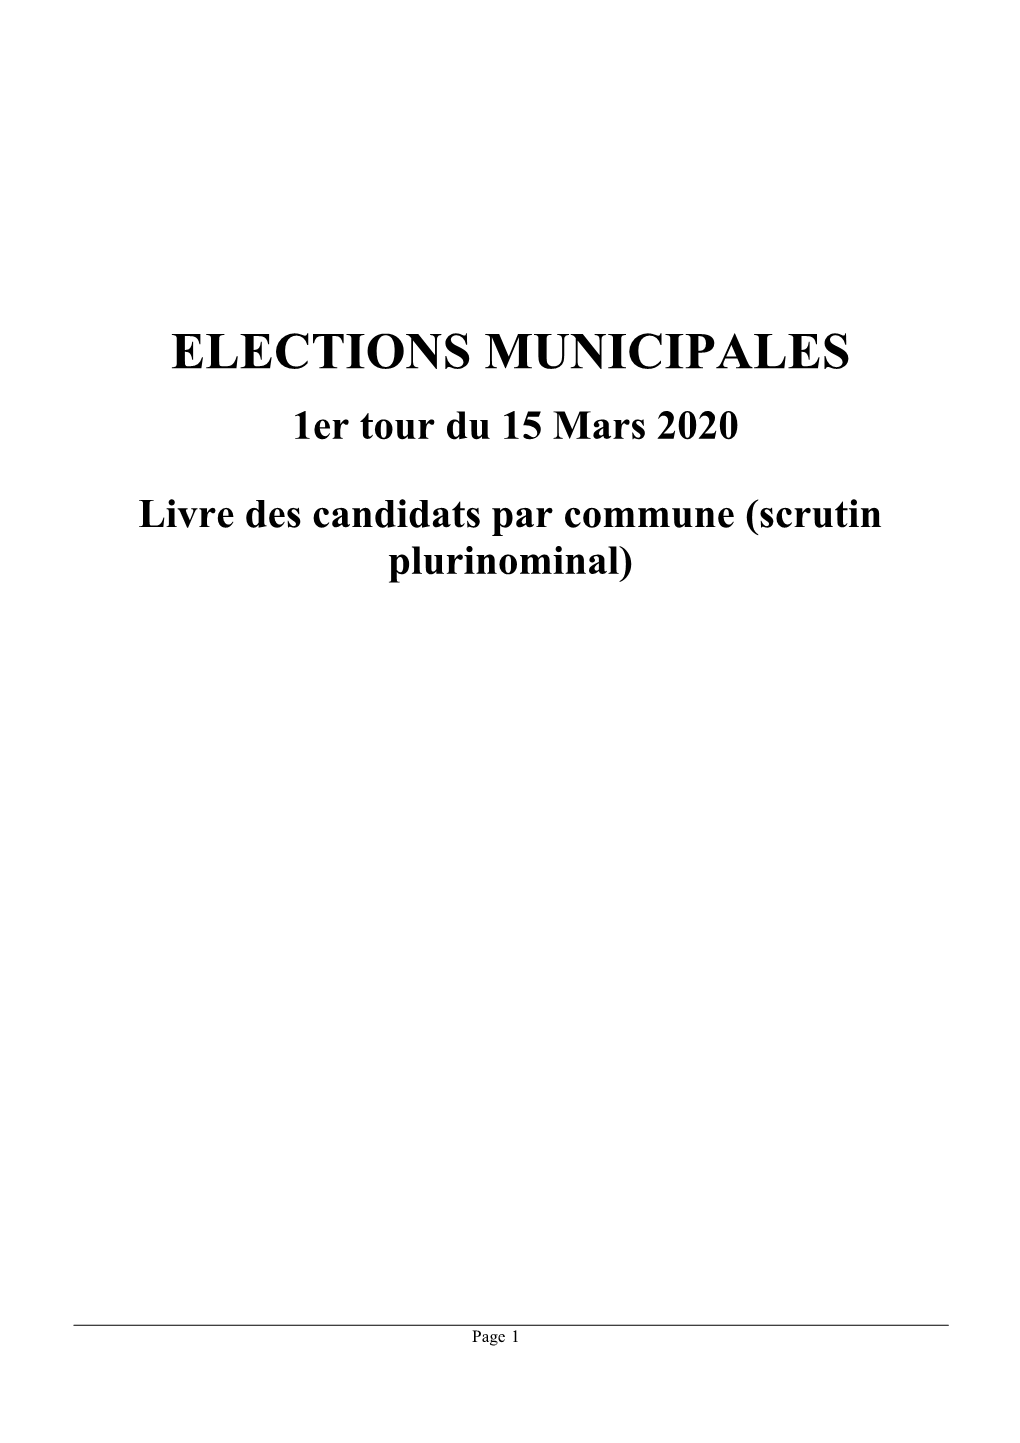 Candidatures Individuelles 28-02-2020